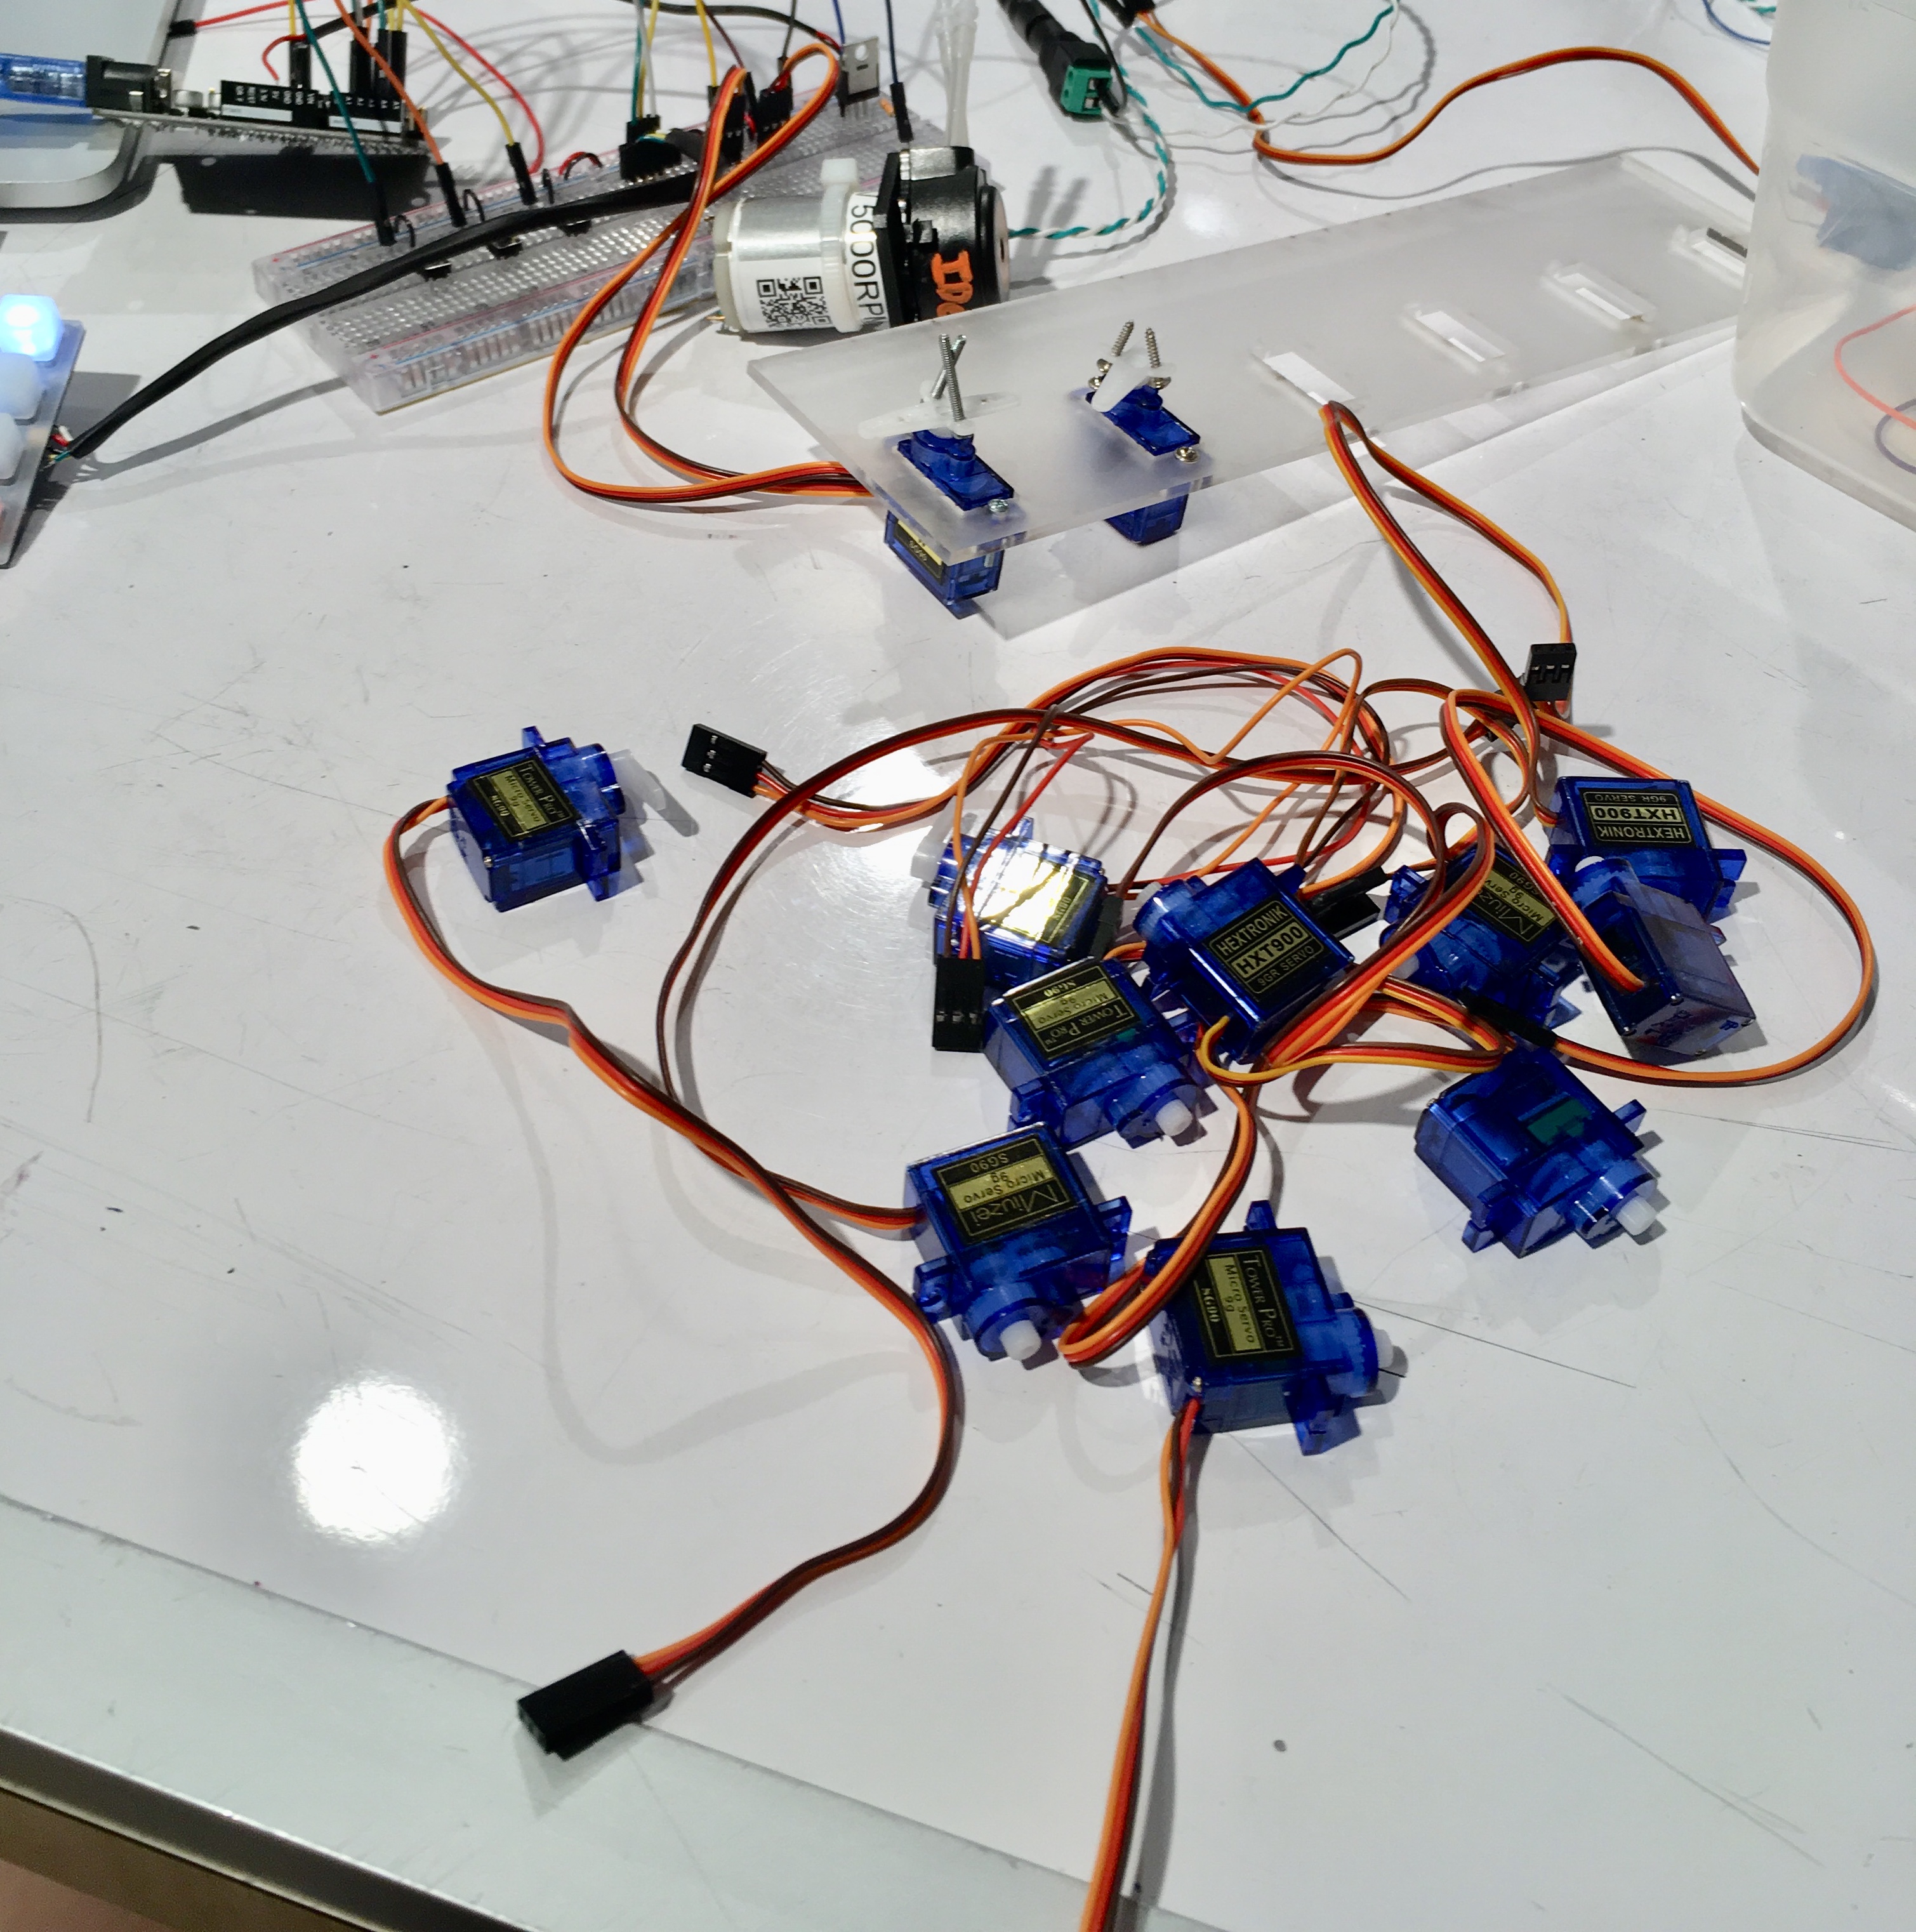 Tested many servos to find the ones that don't jitter when the pump is on